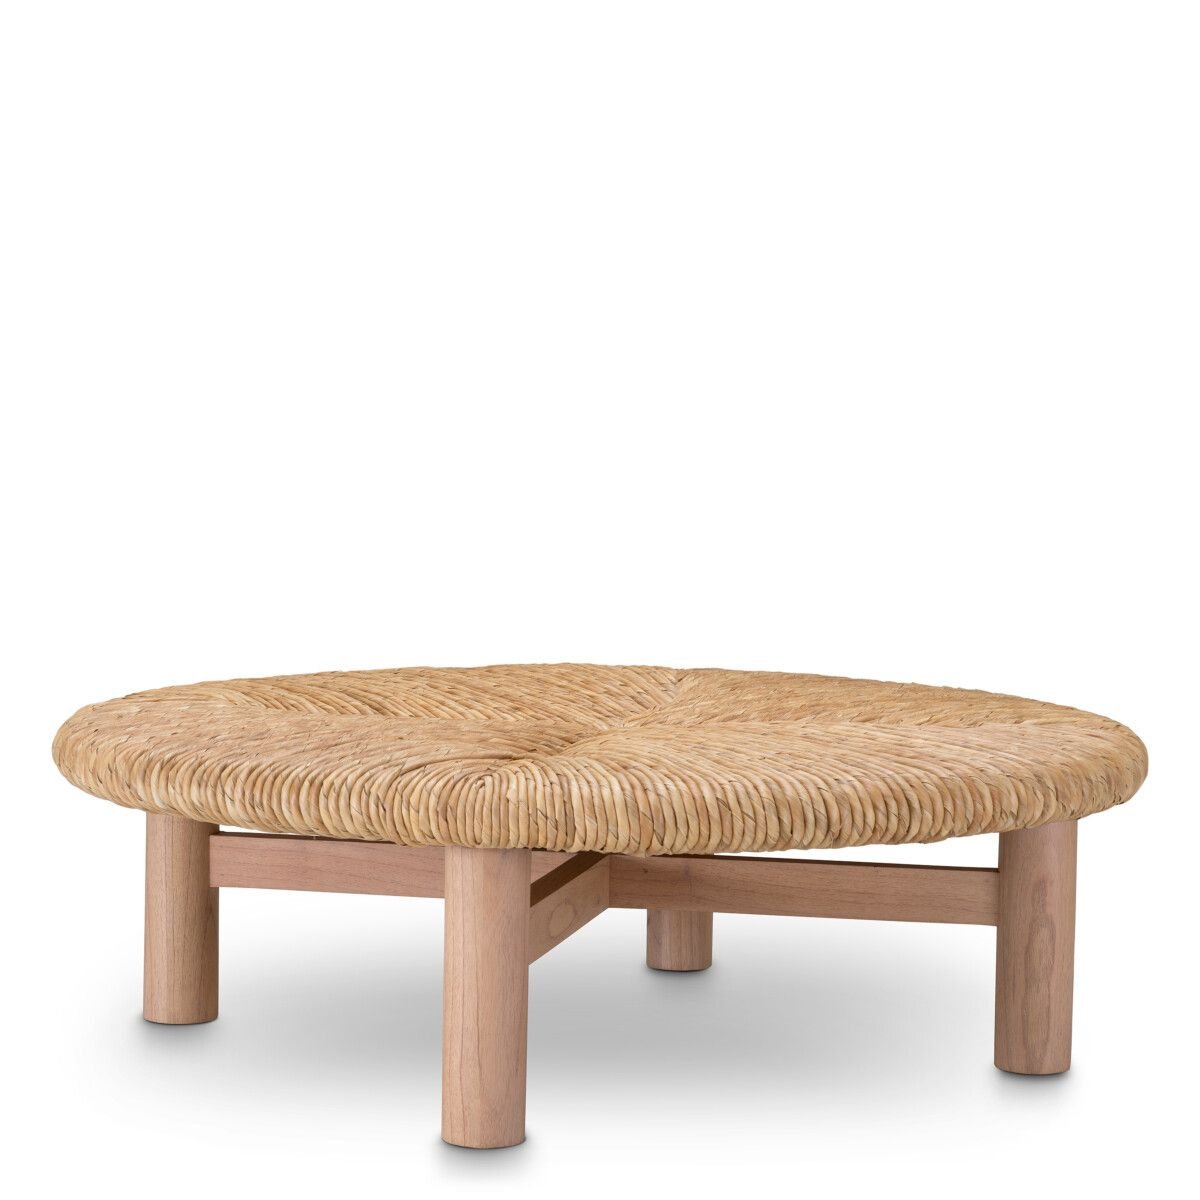 Costello coffee table natural